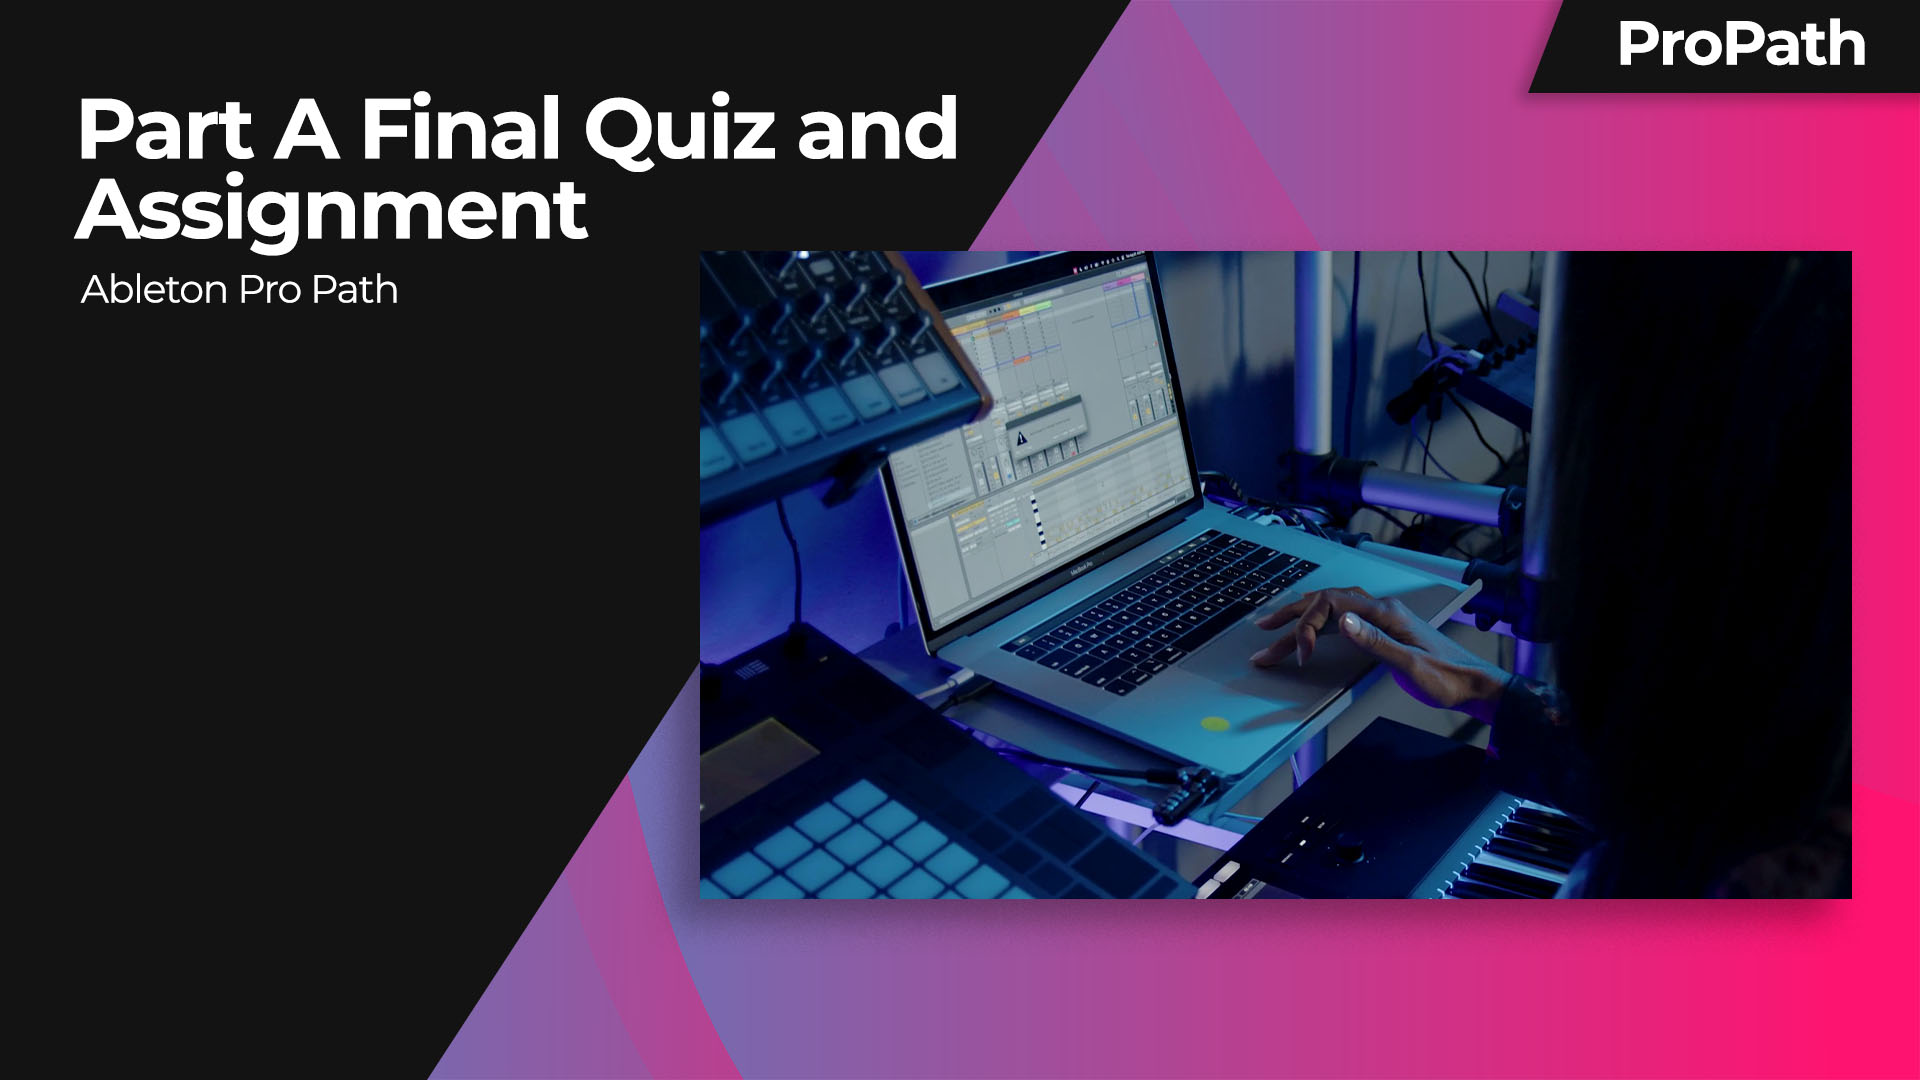 Ableton Pro Path: Part A Final Quiz and Assignment